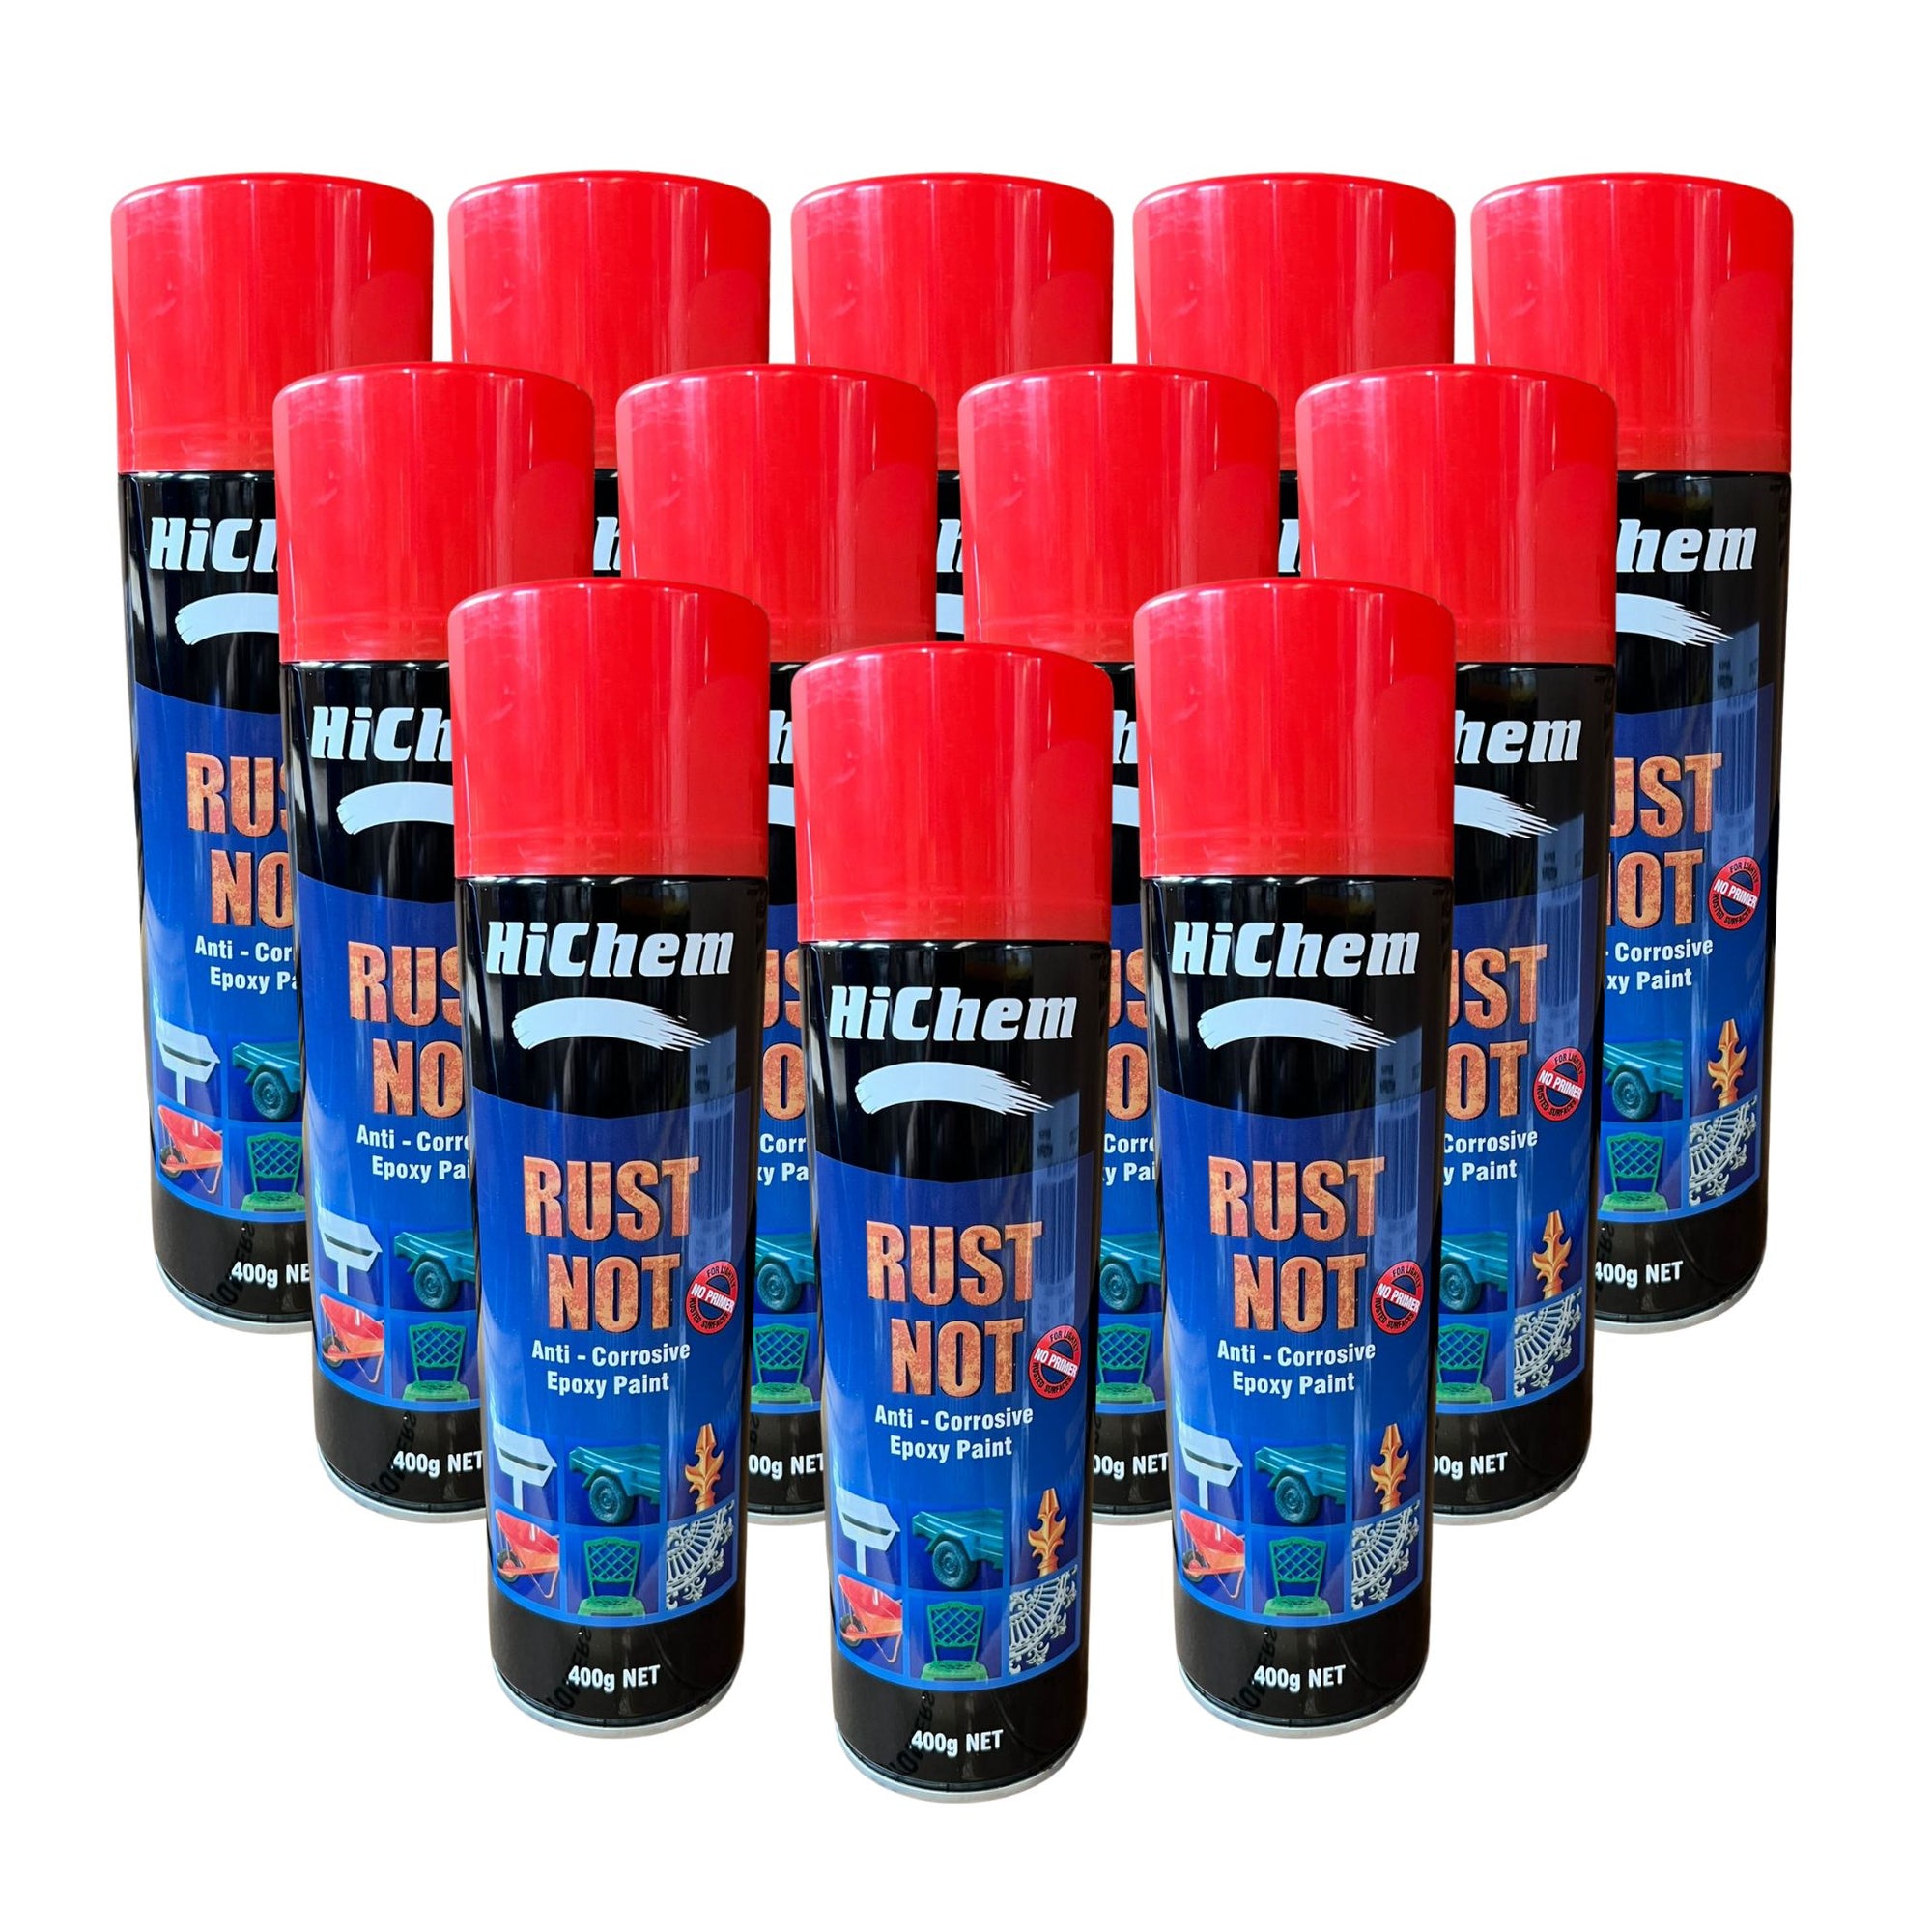 Hichem Rust Not Anti Corrosive Epoxy Paint 400g - Signal Red (12 Cans) - South East Clearance Centre